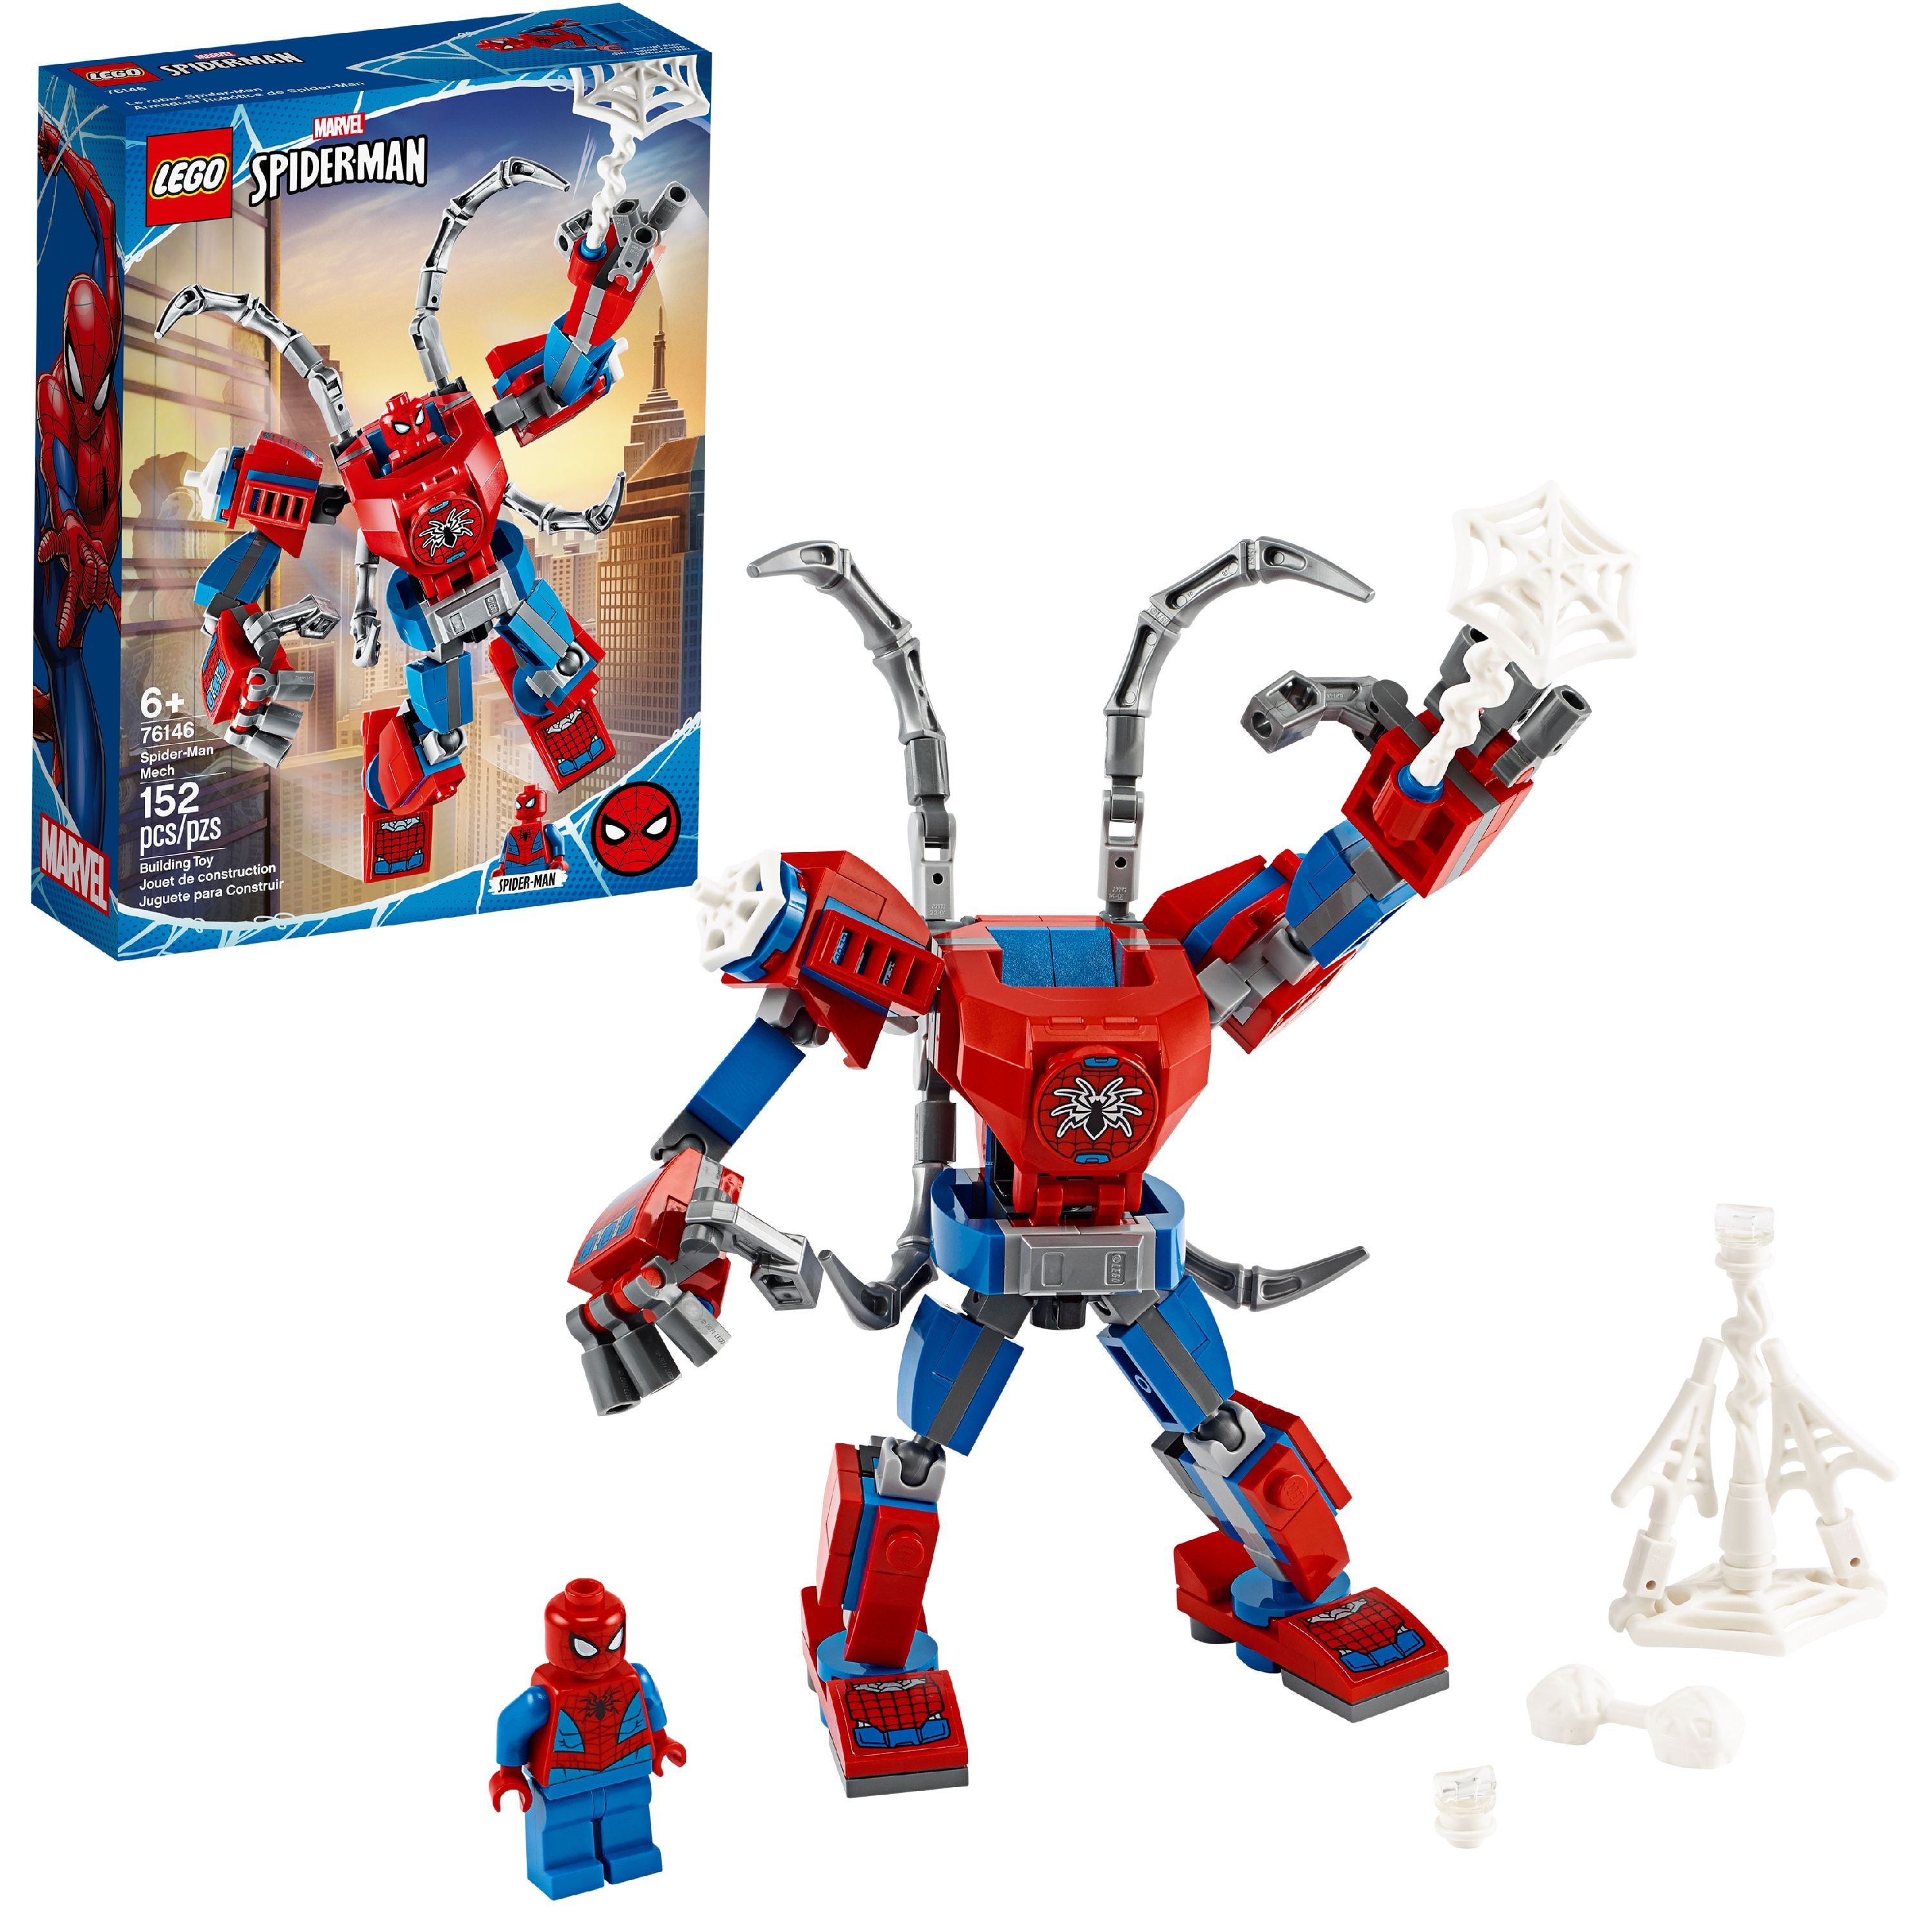 New 2020 Playset with Mech and Minifigure 152 Pieces LEGO Marvel Spider-Man: Spider-Man Mech 76146 Kids’ Superhero Building Toy 